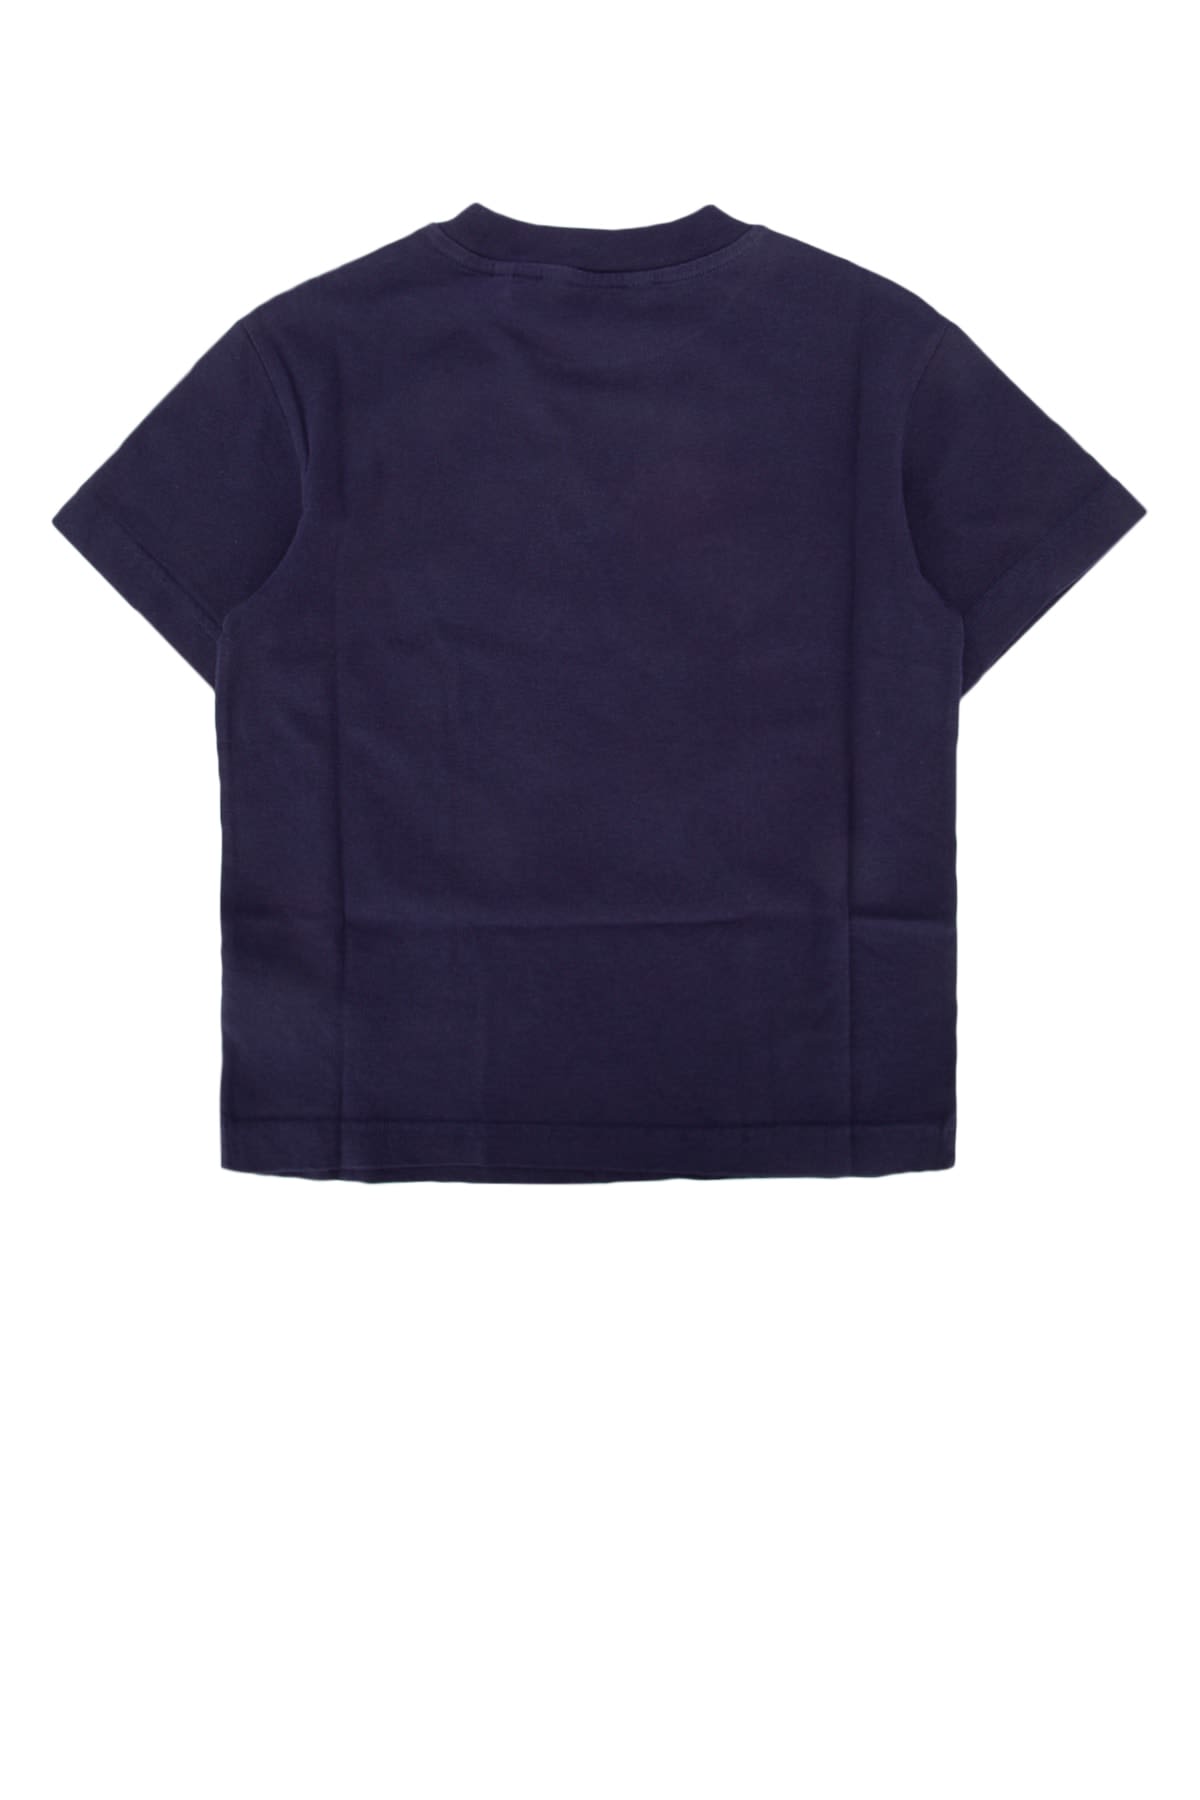 Palm Angels Kids' T-shirt In Navybluered